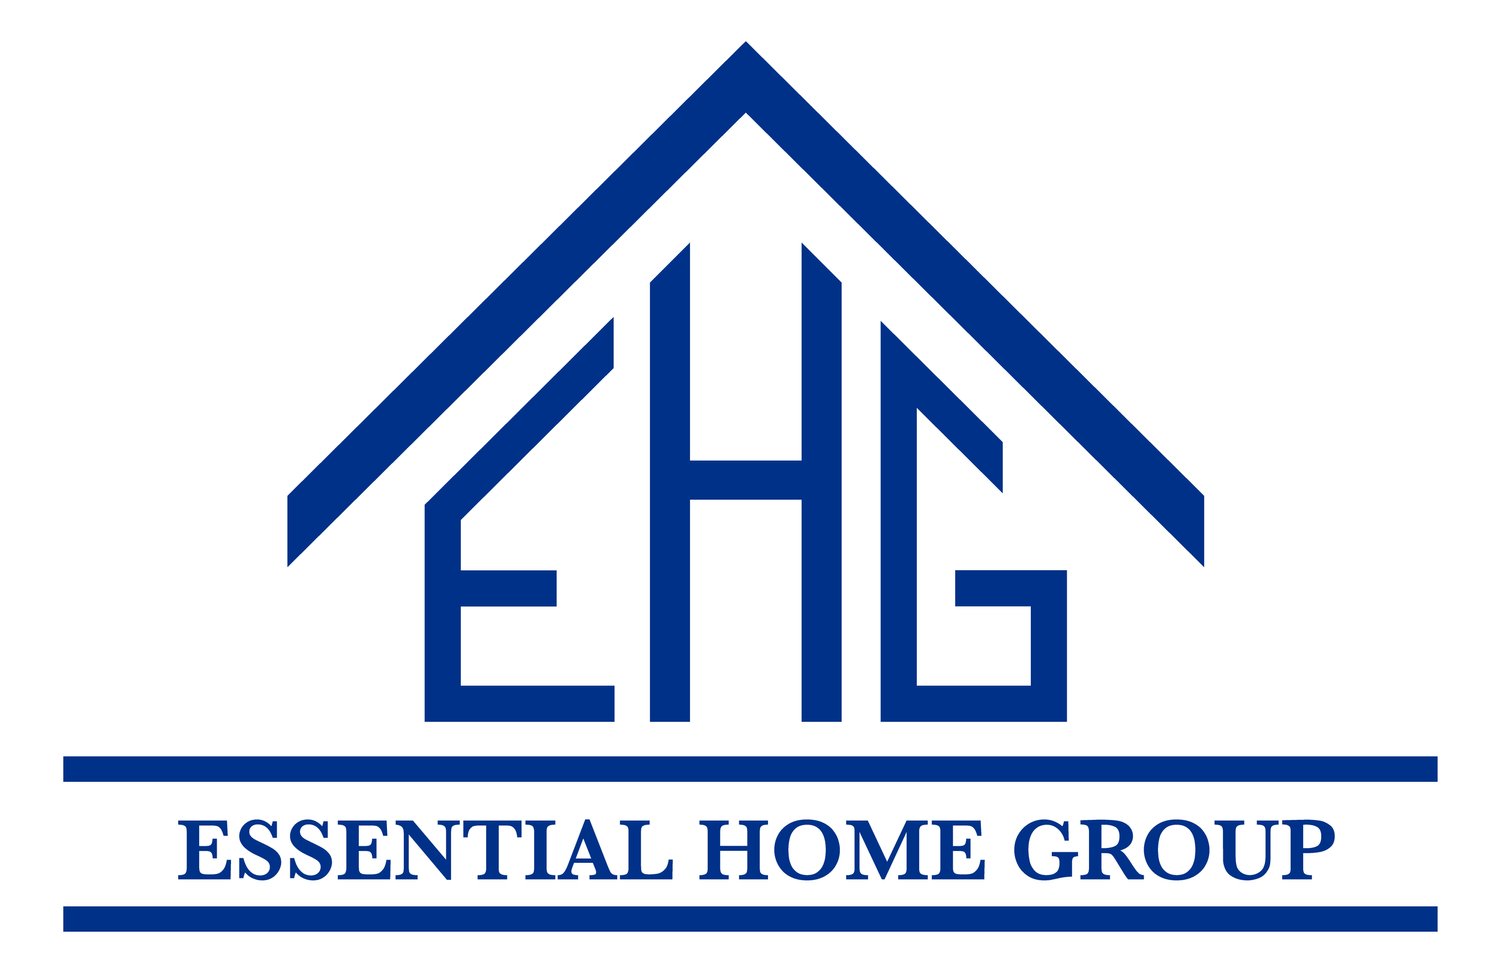 Essential Home Group